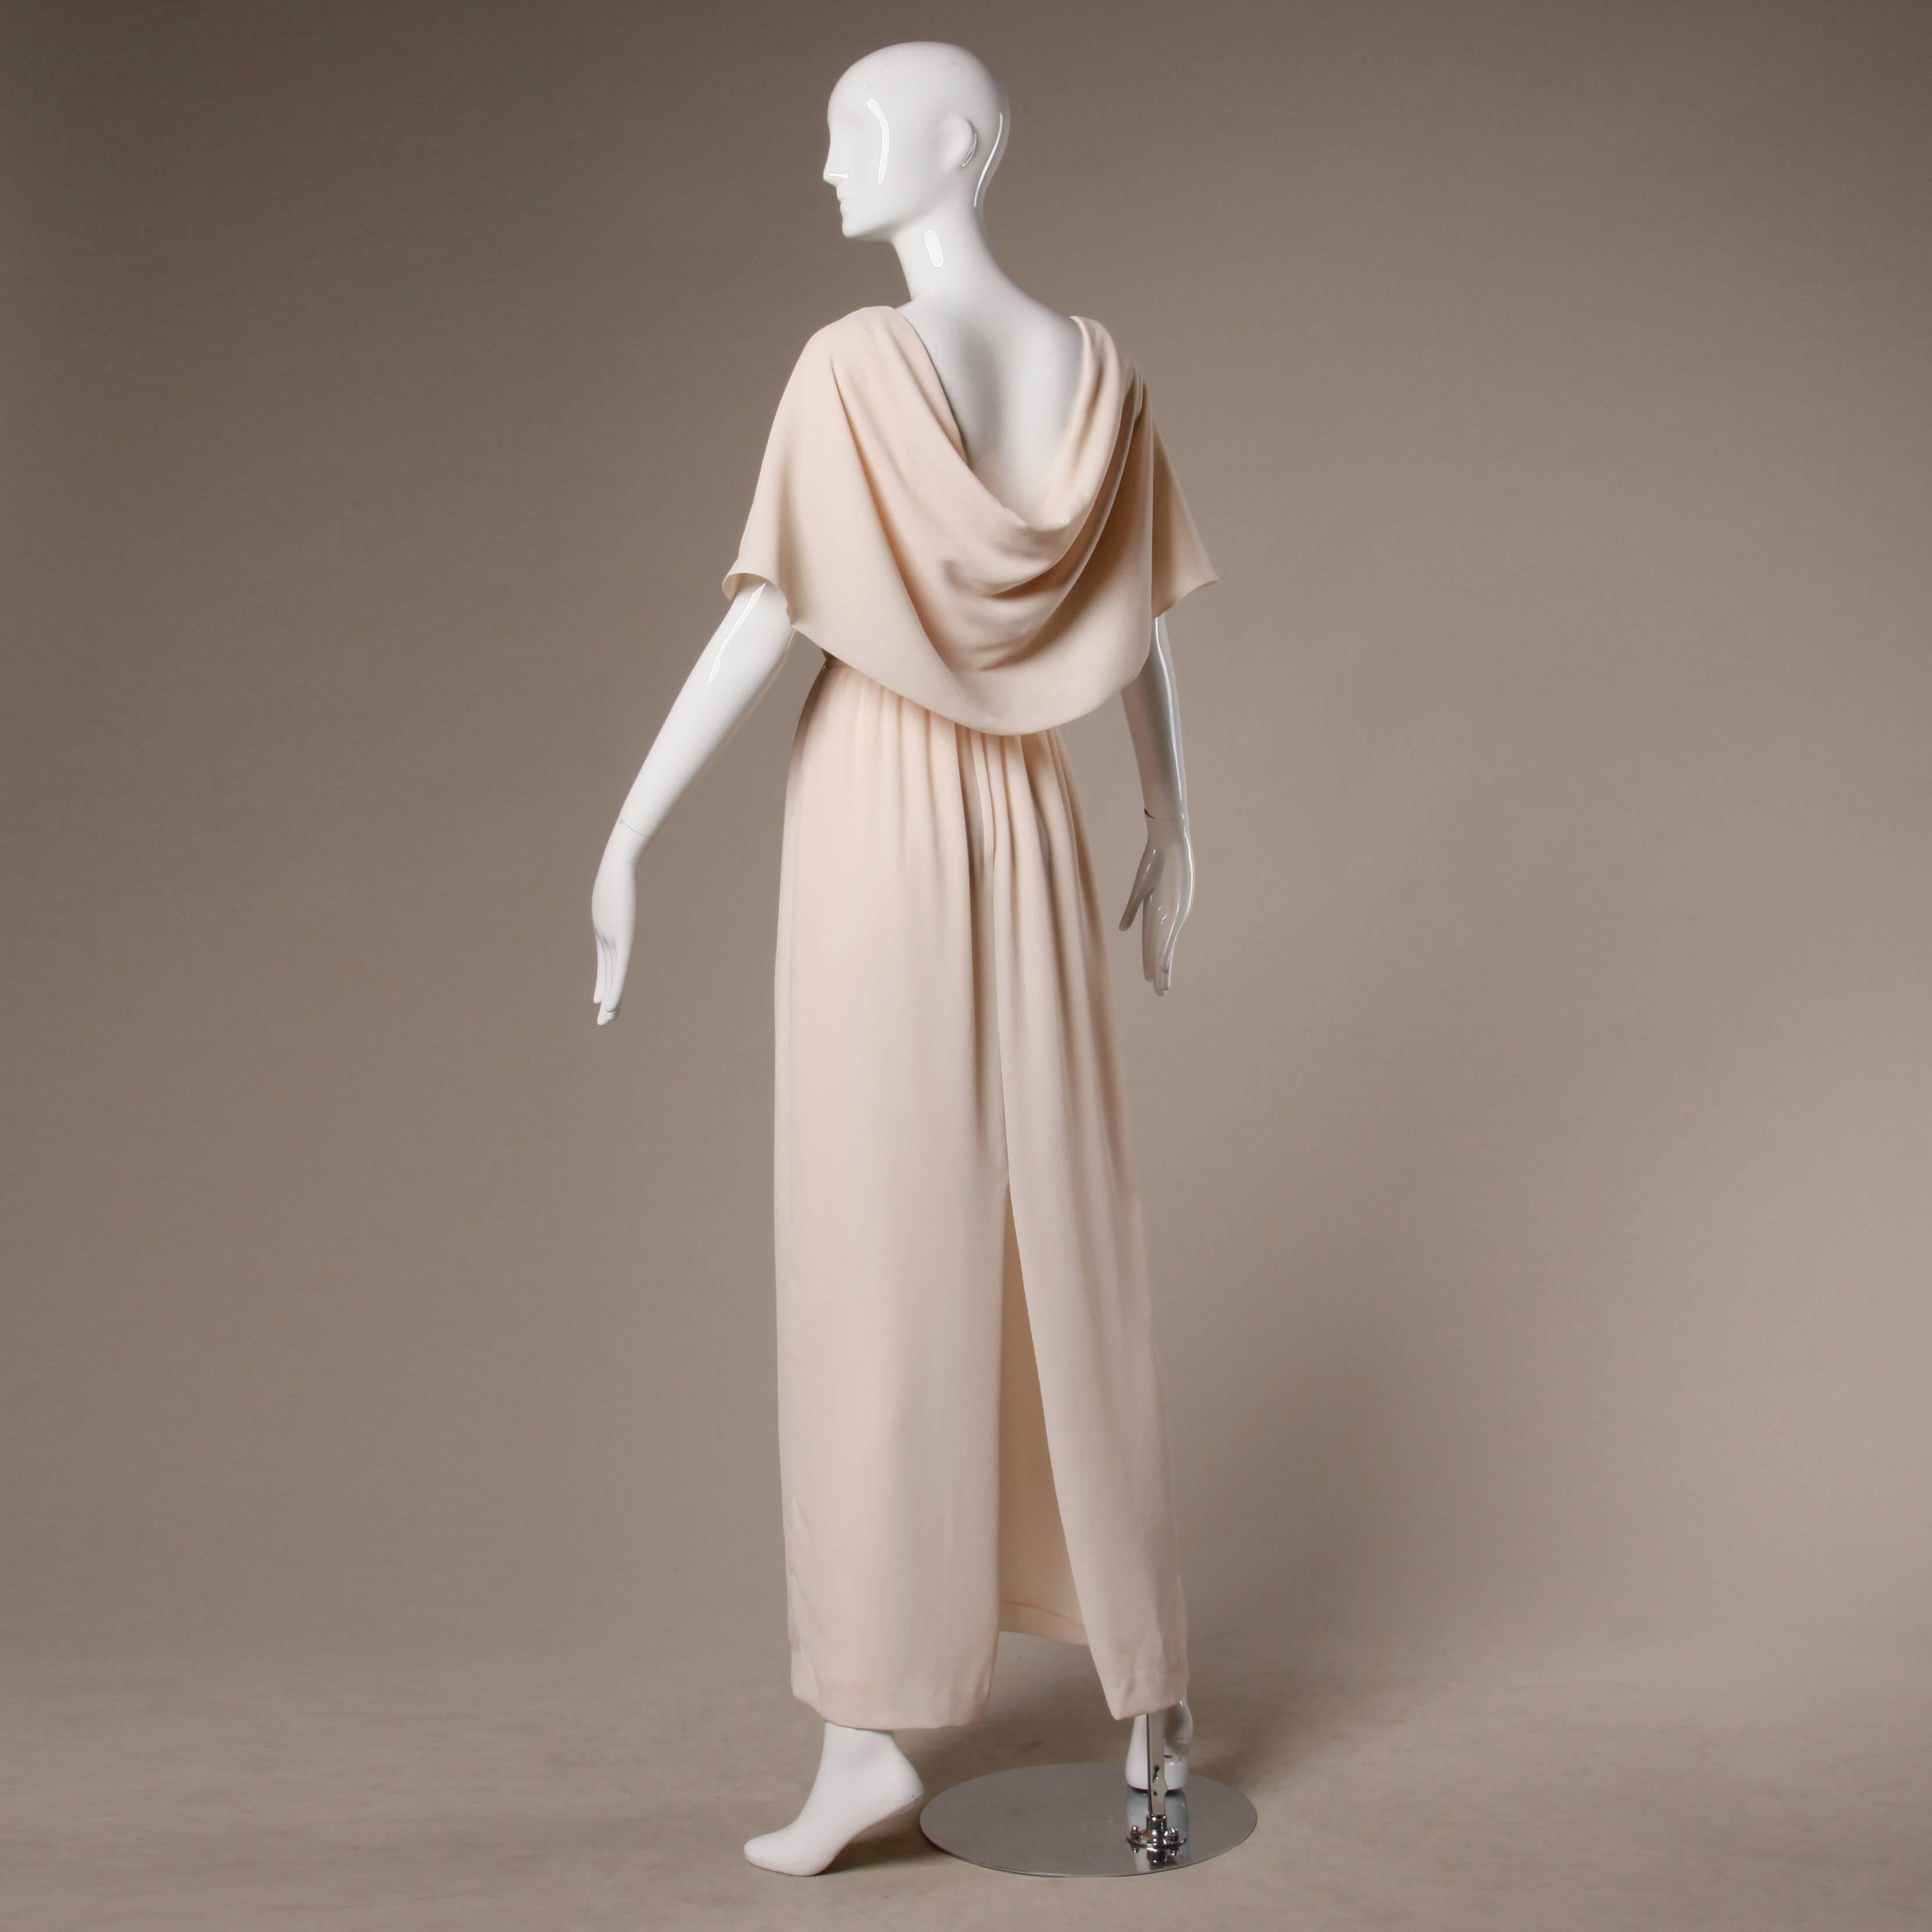 Elegant vintage Jack Bryan blush gown with the original tags still attached. Matching ruched sash waistband. Rear zip and hook closure. Fully lined. 100% light weight polyester. The marked size is 8. The dress fits like a modern small-medium. The